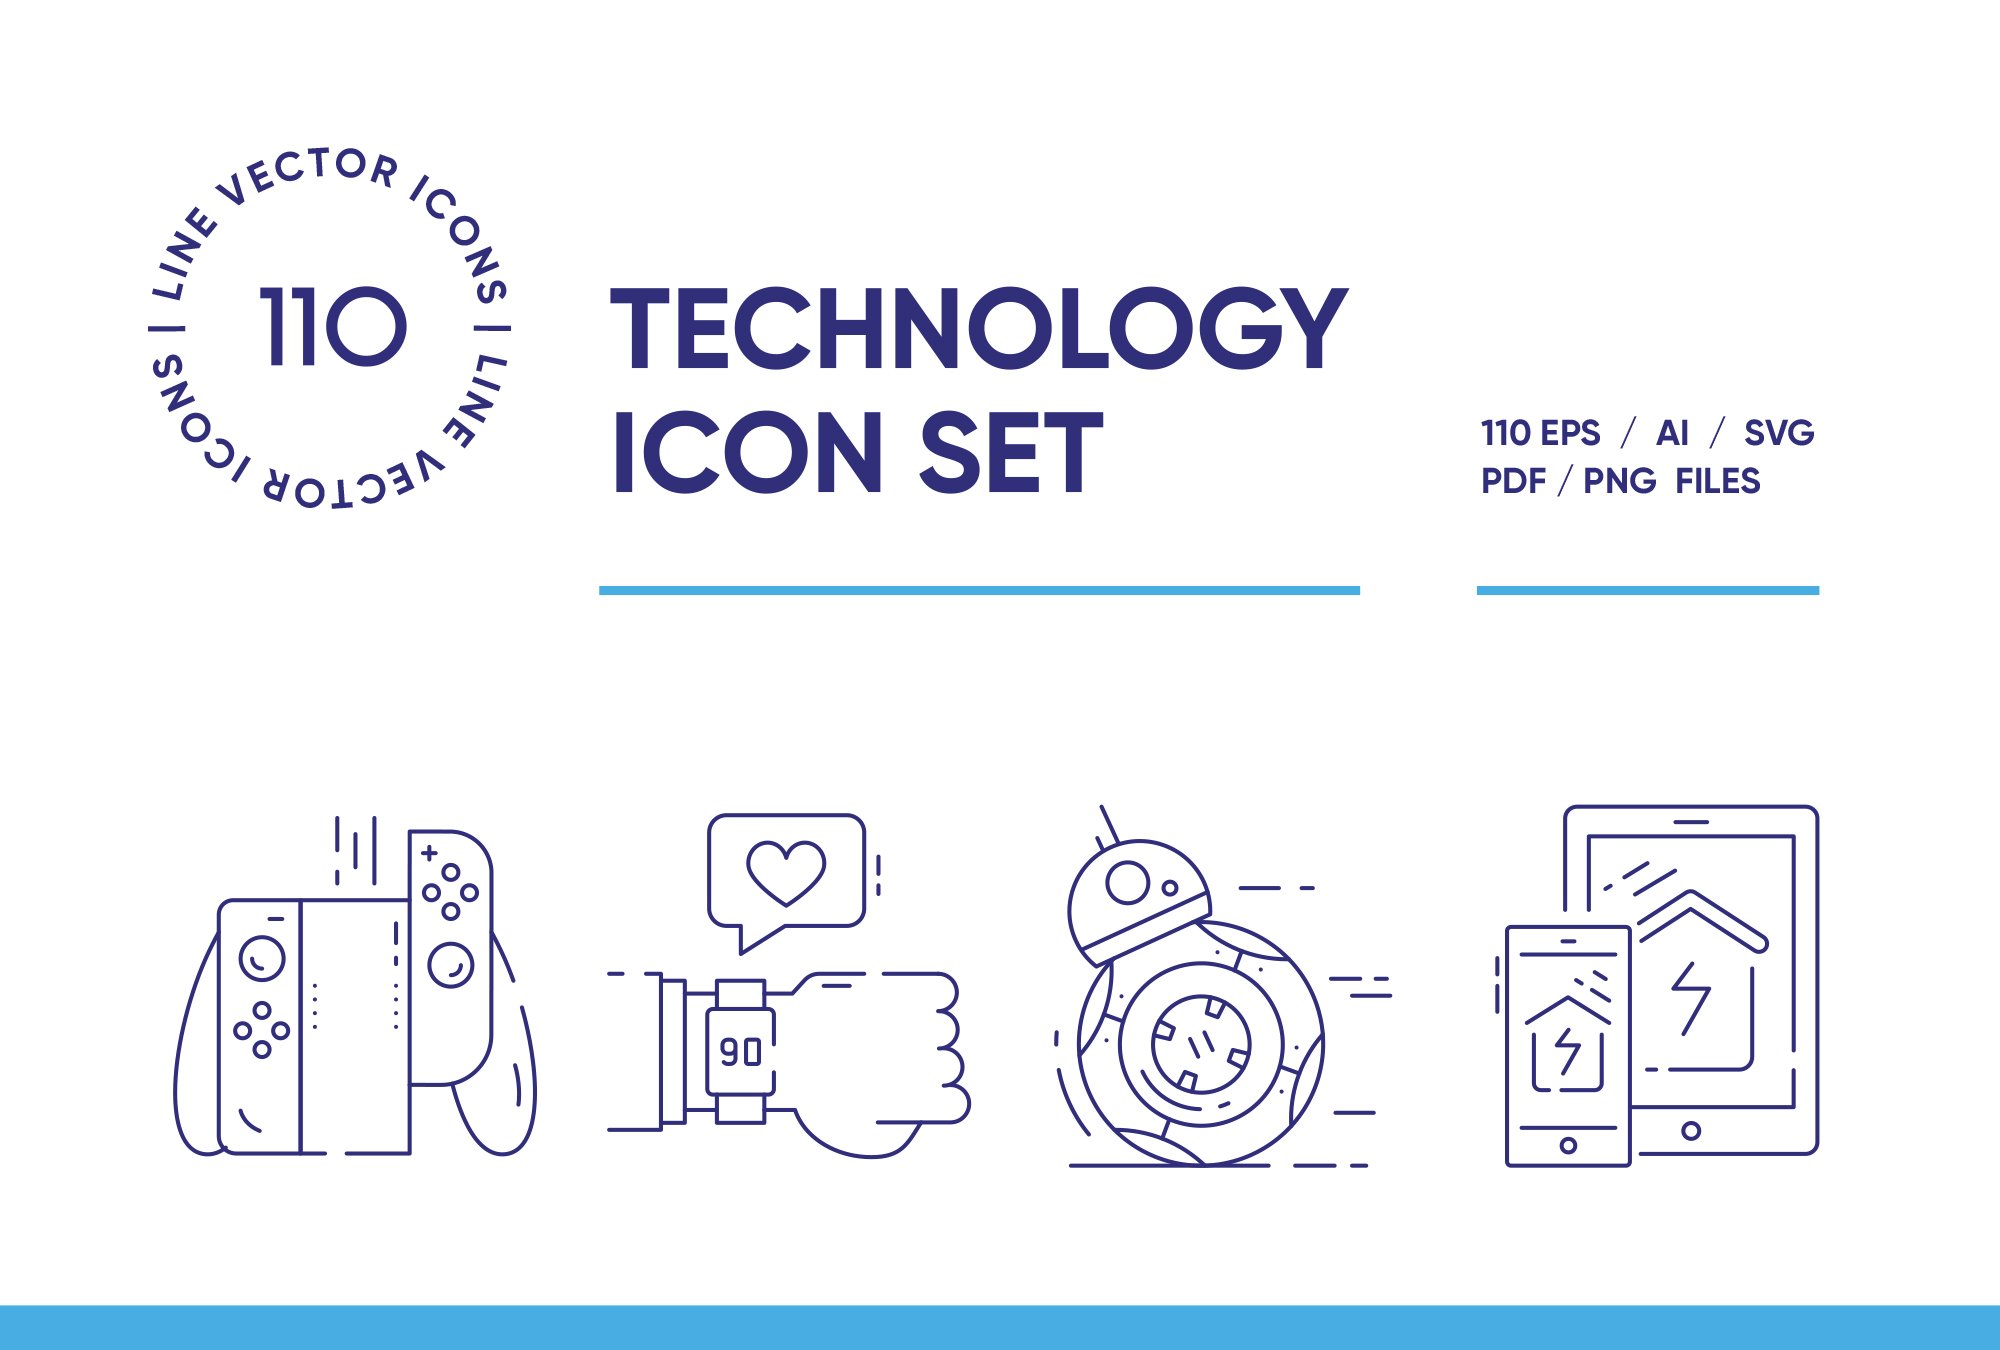 Technology Line Icon Set cover image.